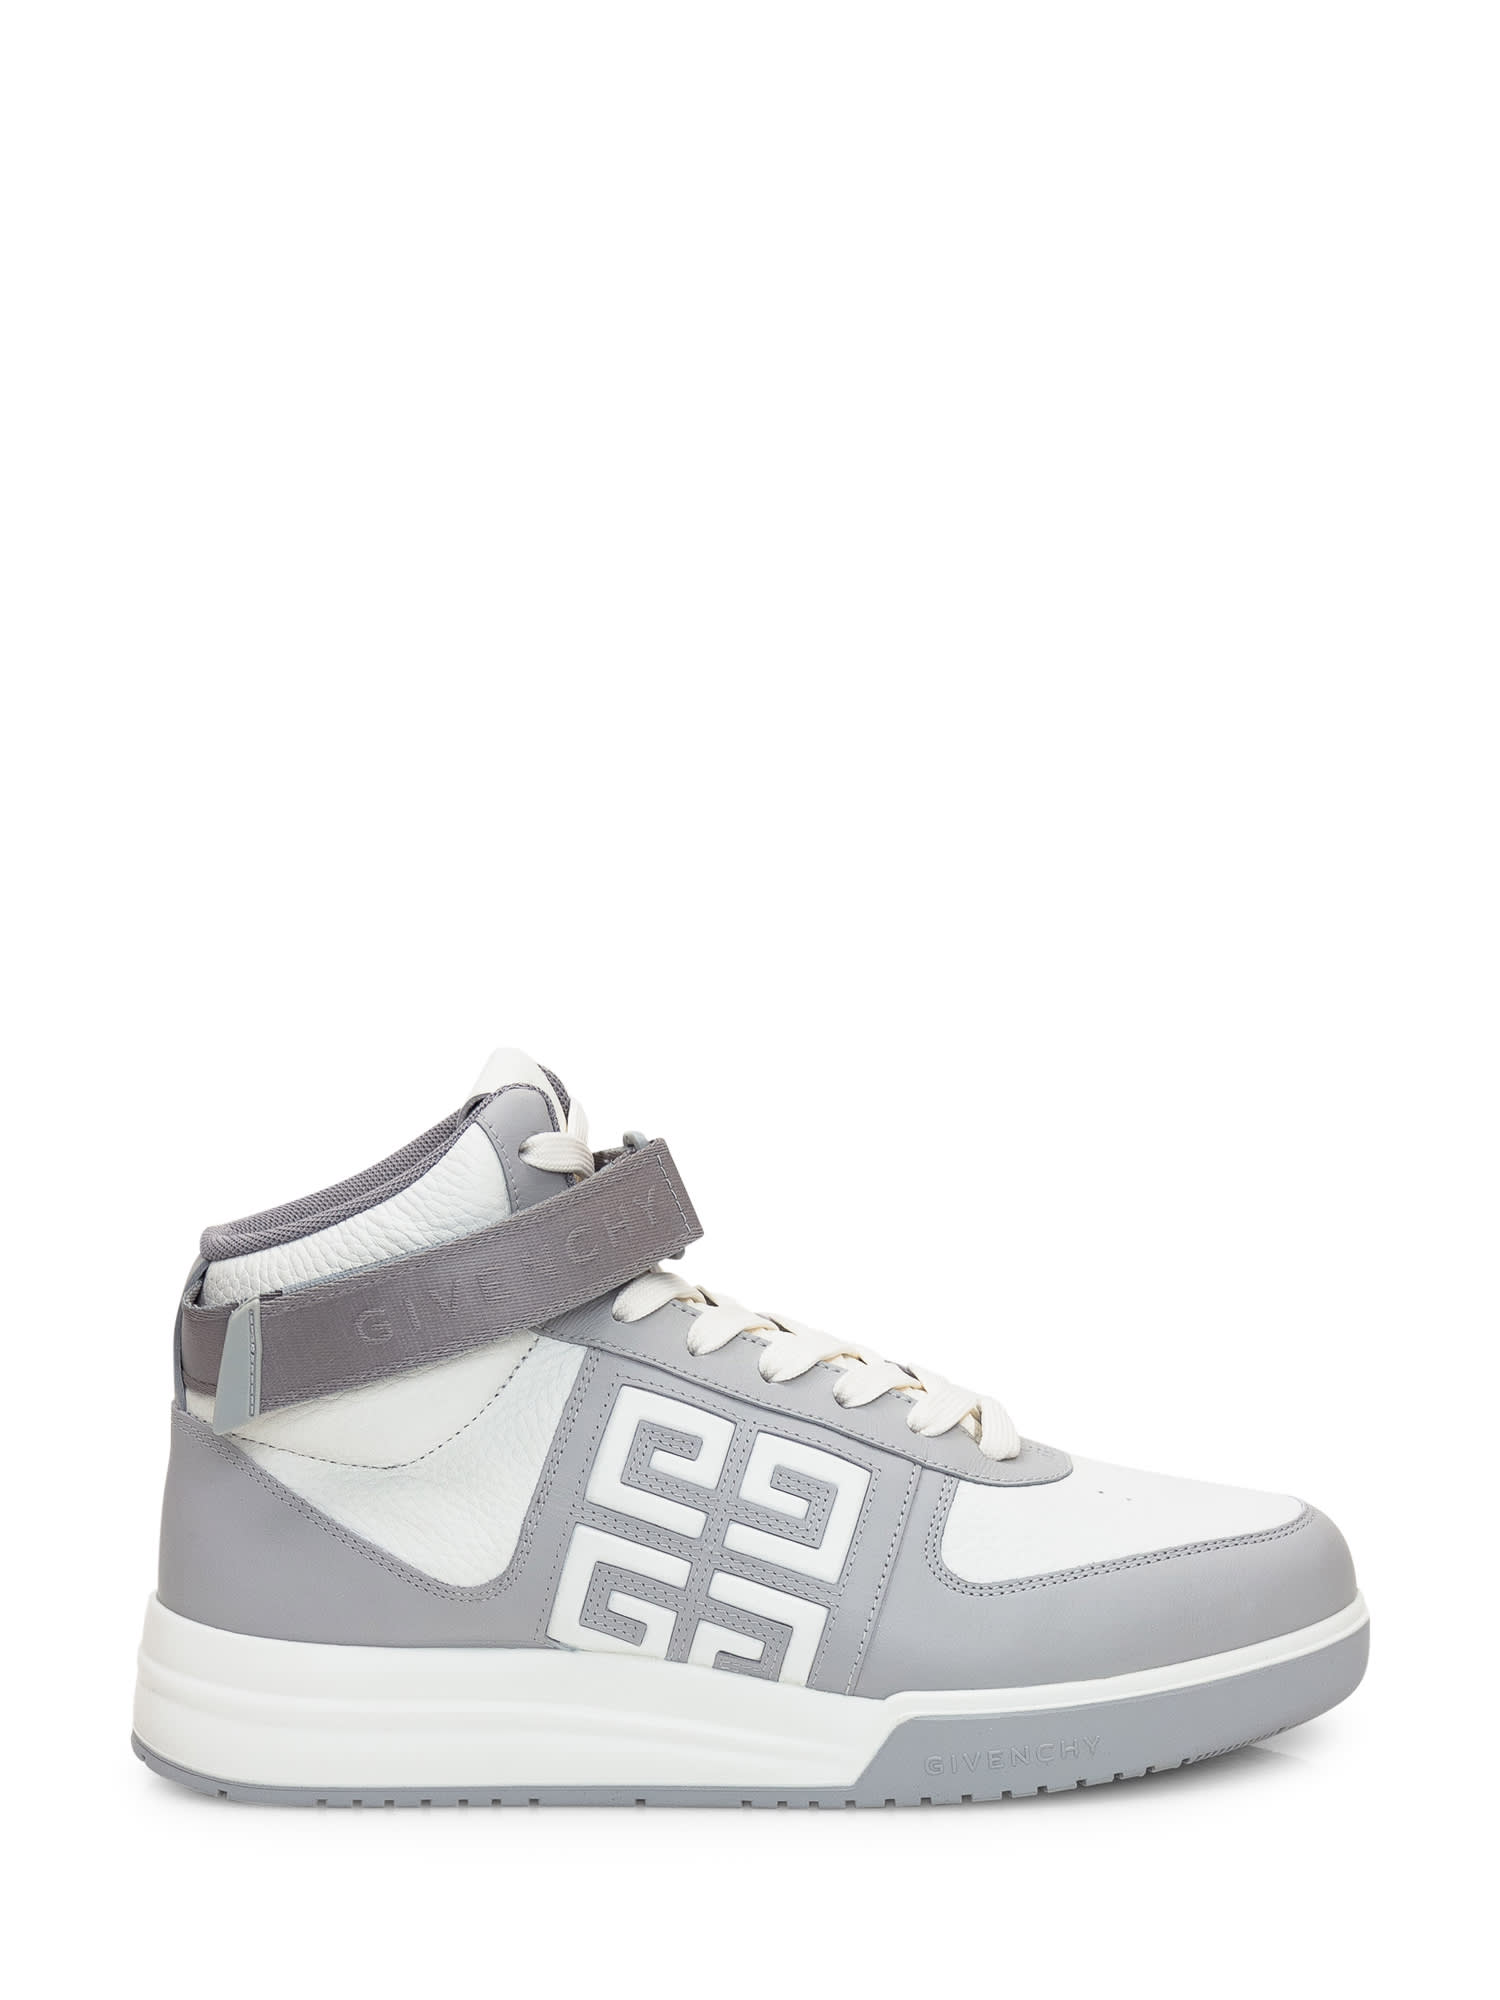 Givenchy G4 High Sneaker In White